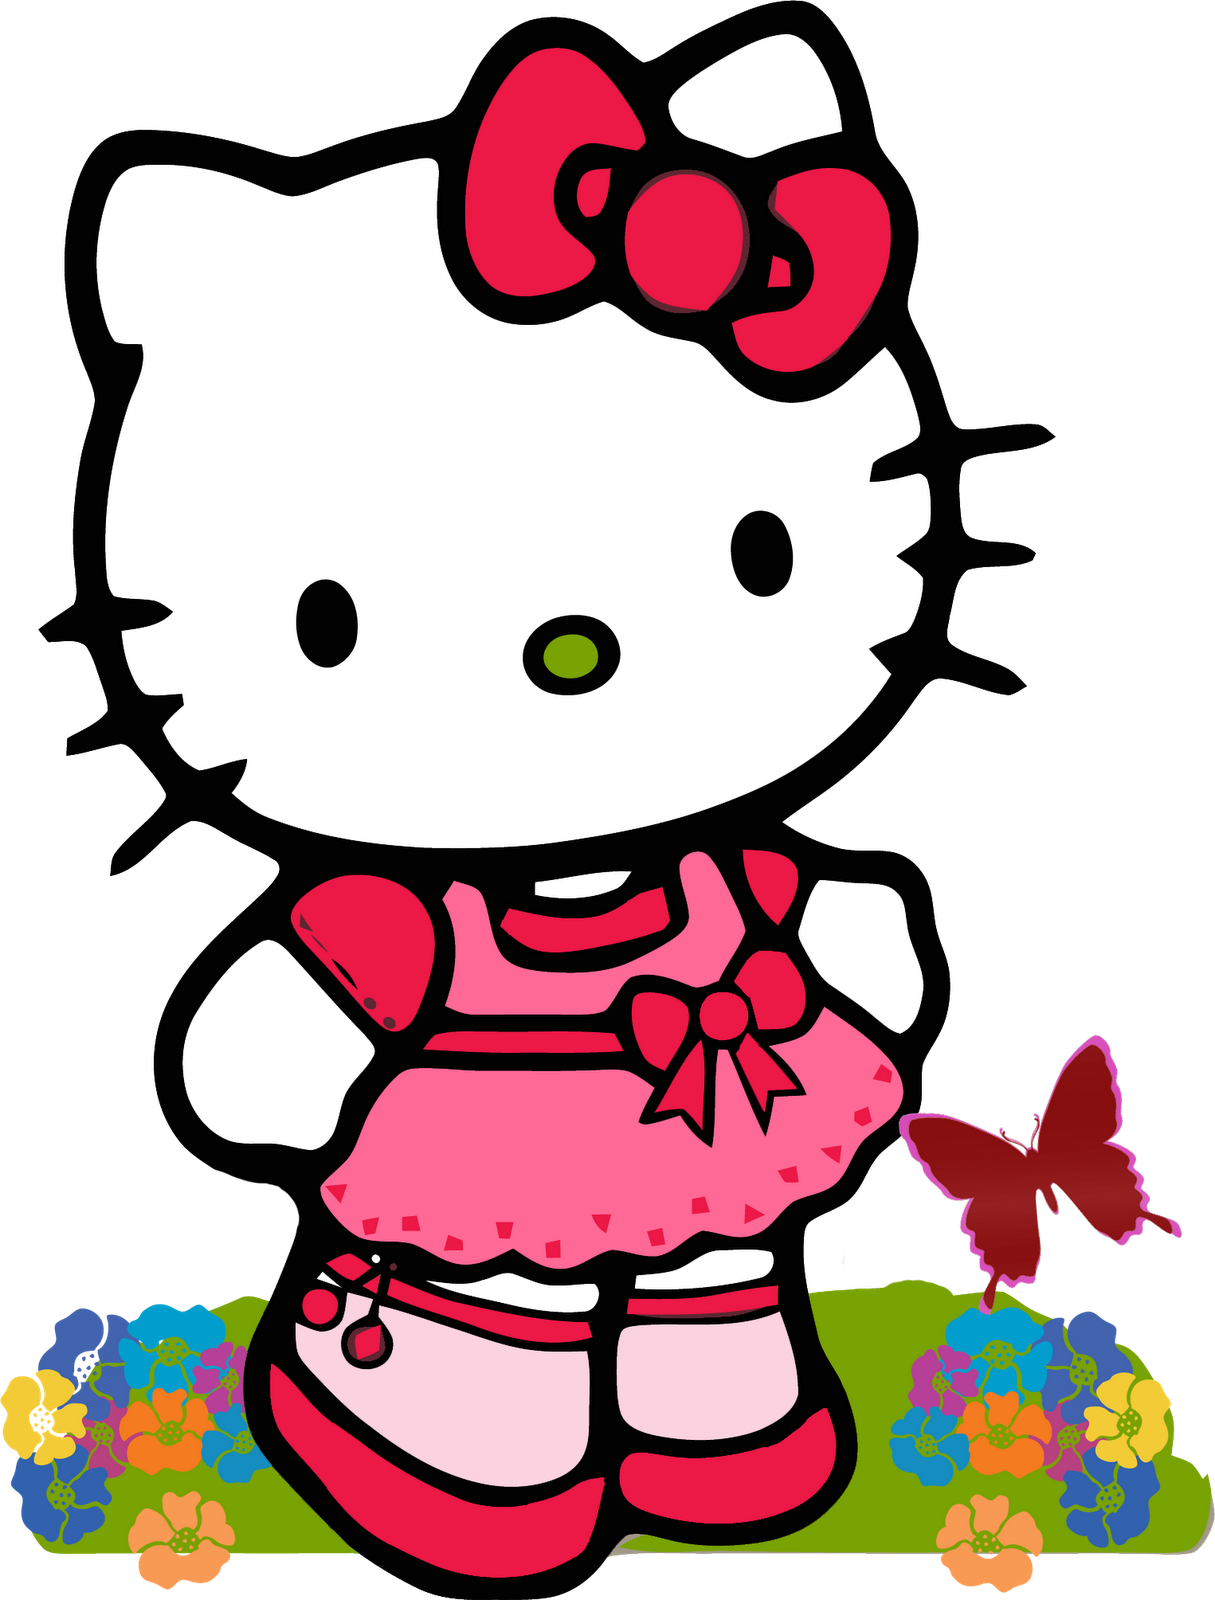 Kitty Cat PNG Image High Quality PNG Image